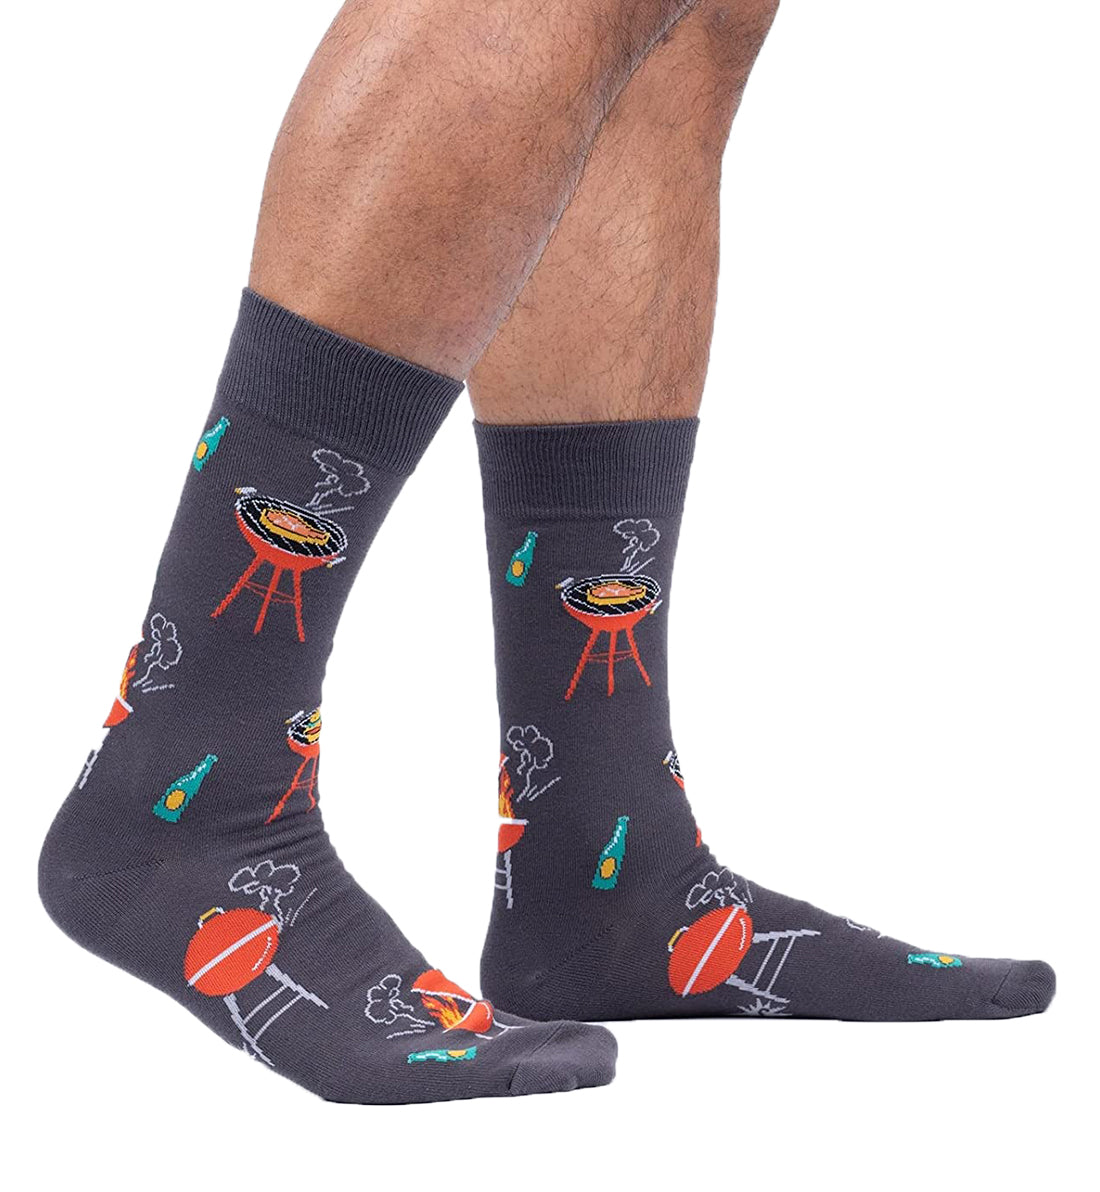 SOCK it to me Men's Crew Socks (MEF0565),The Steaks are High - The Steaks are High,One Size